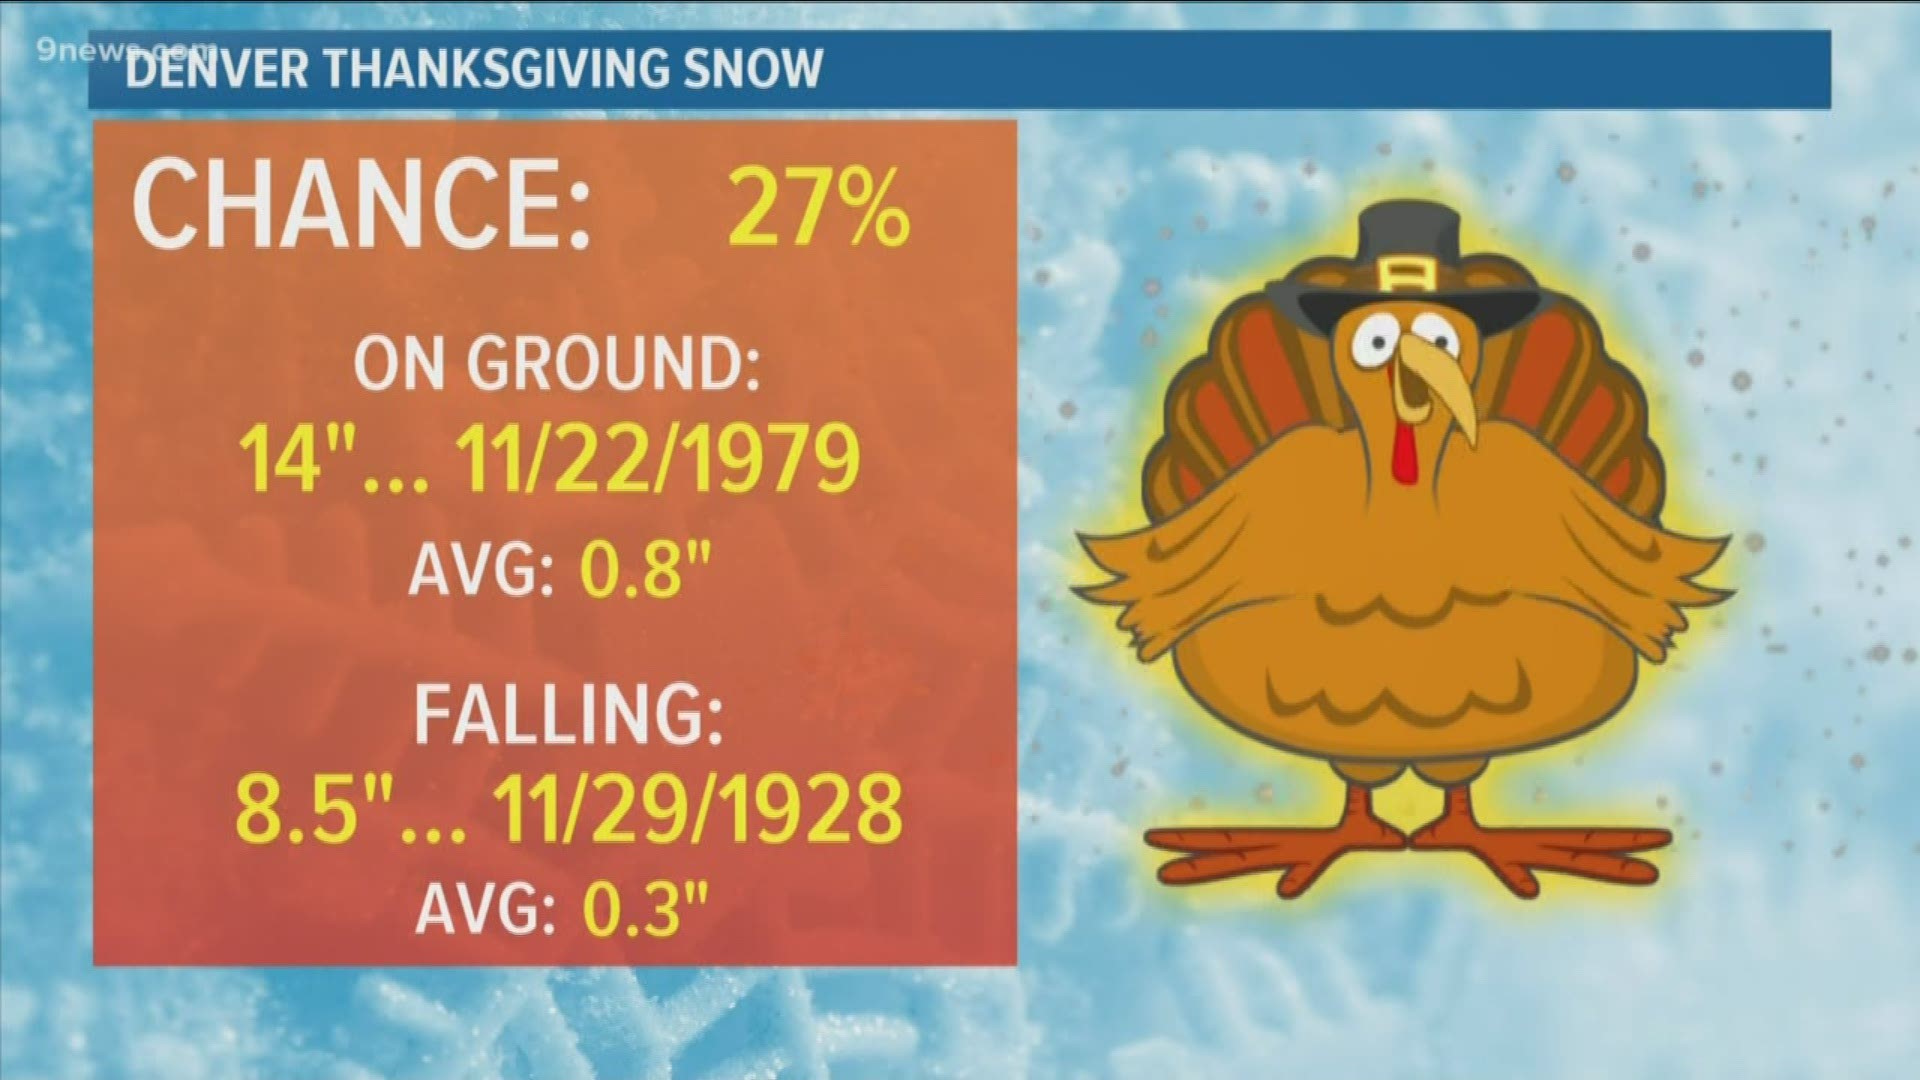 Will Denver have a white Thanksgiving?